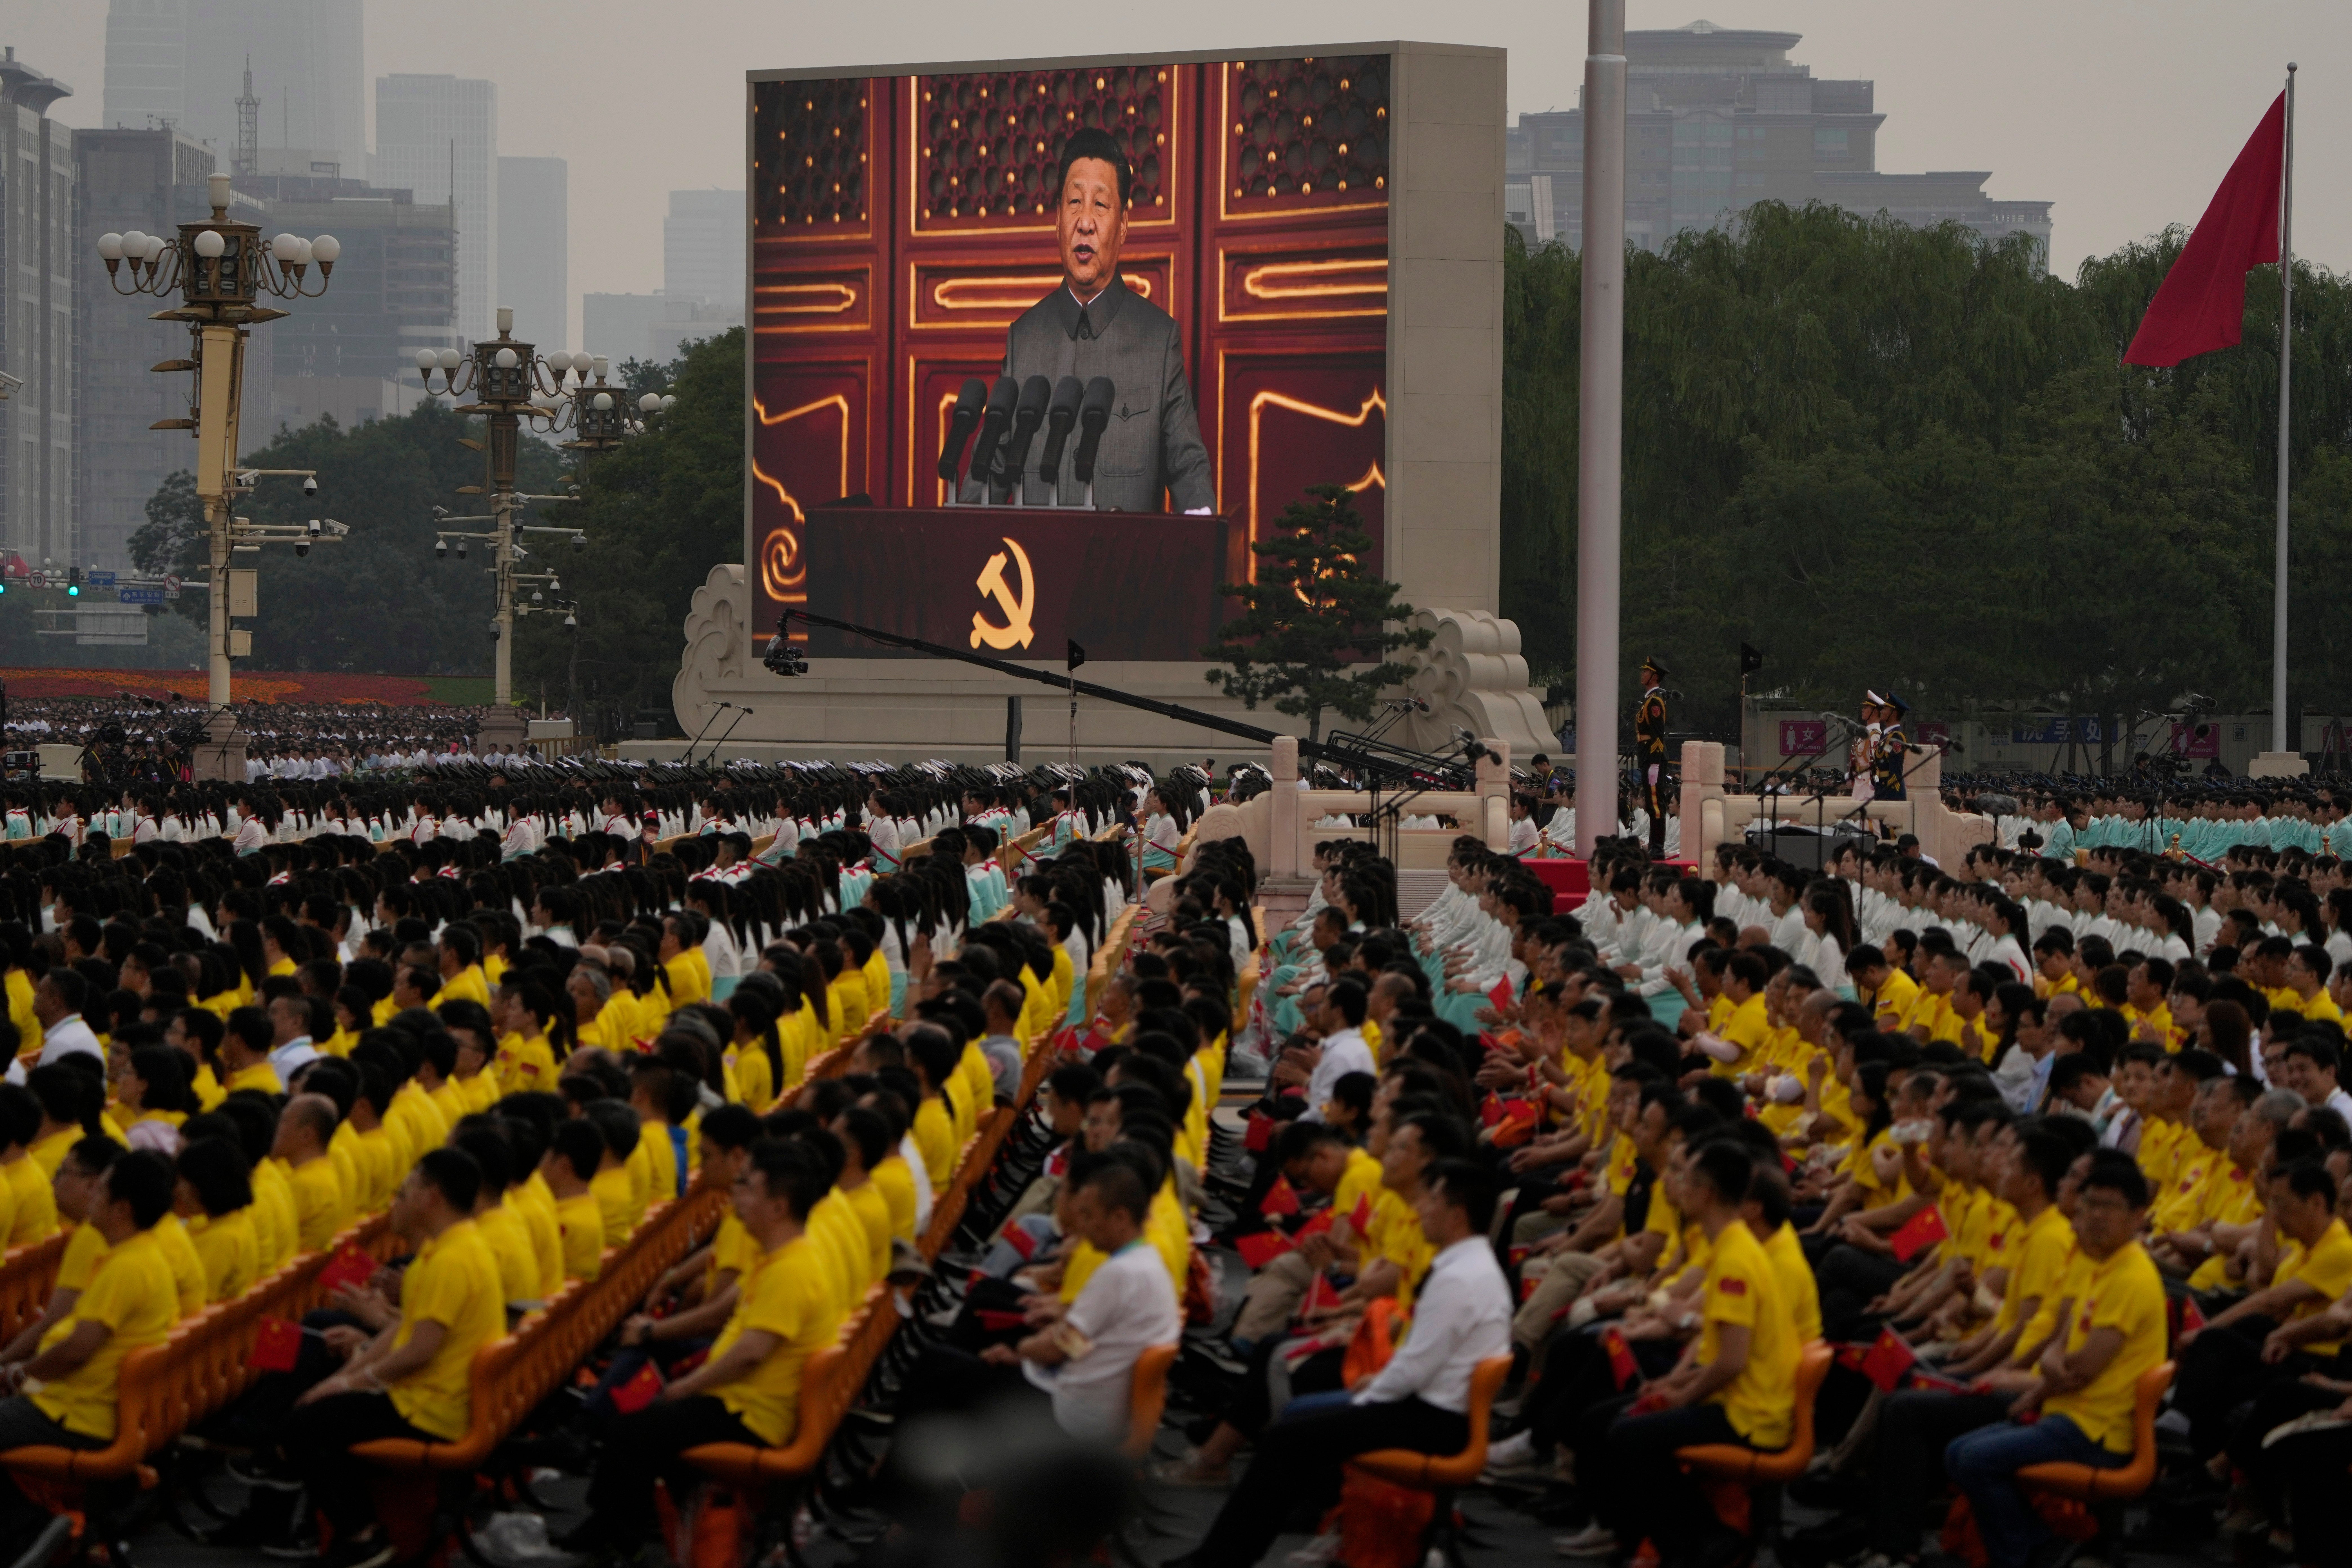 Chinese President Xi Jinping speaks at a ceremony to mark the 100th anniversary of the Chinese Communist Party at Tiananmen Square in Beijing